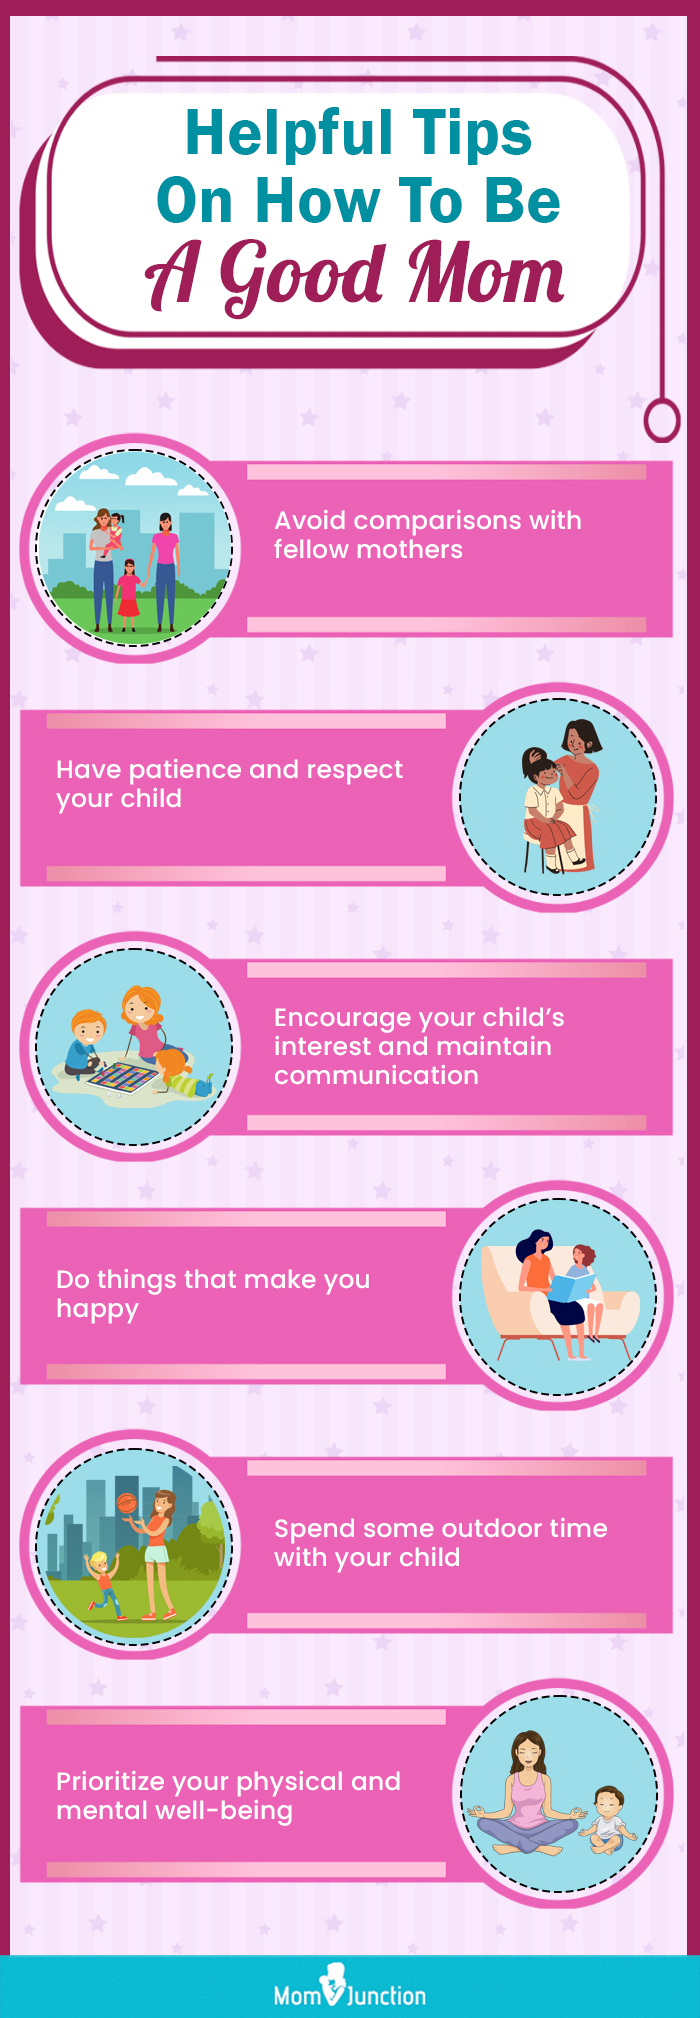 helpful tips on how to be a good mom [infographic]